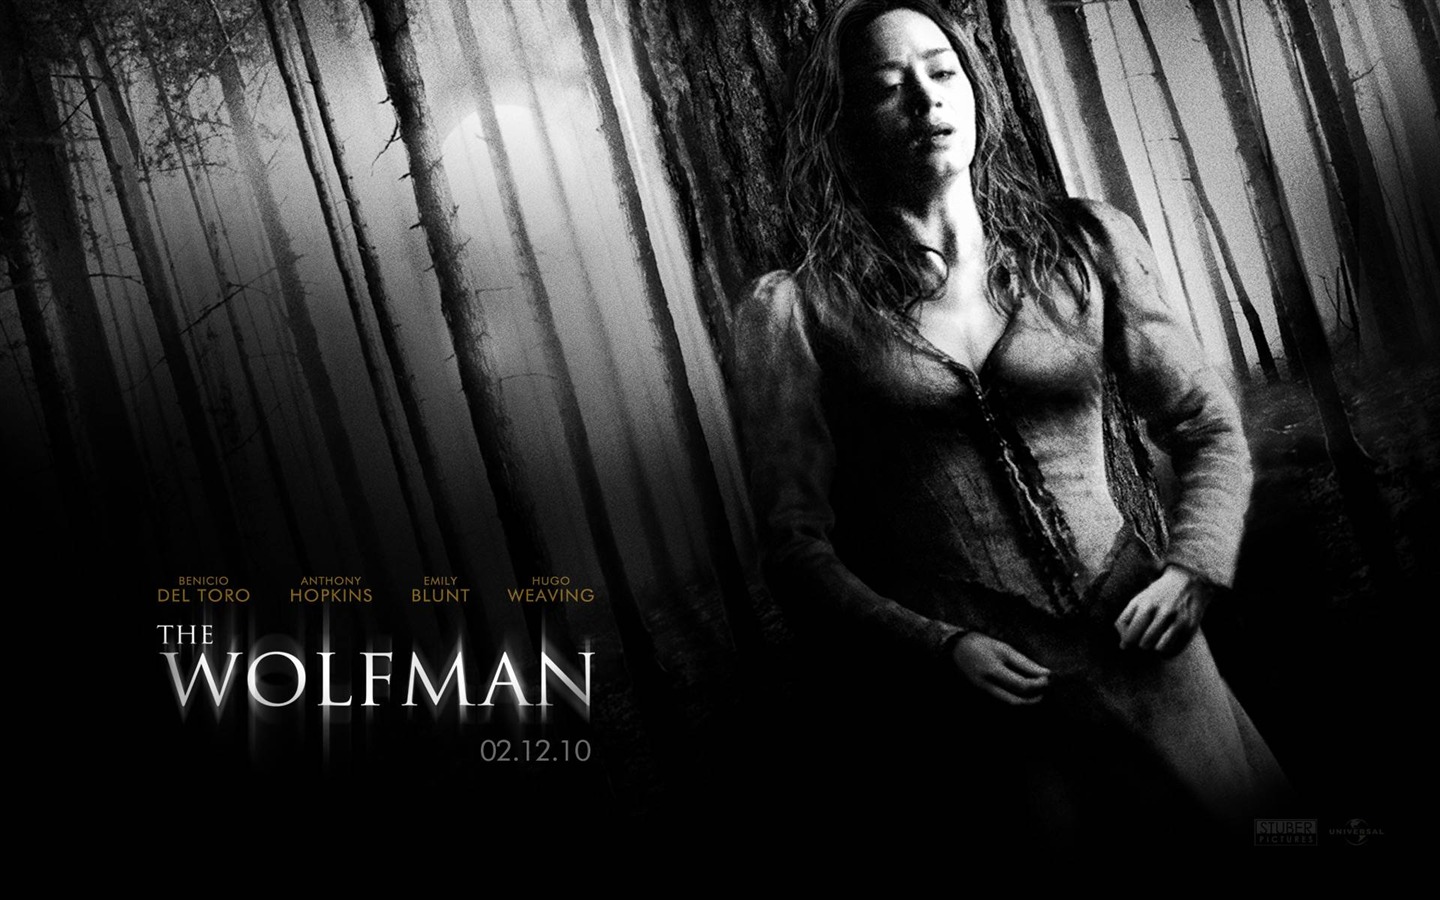 The Wolfman Movie Wallpapers #10 - 1440x900